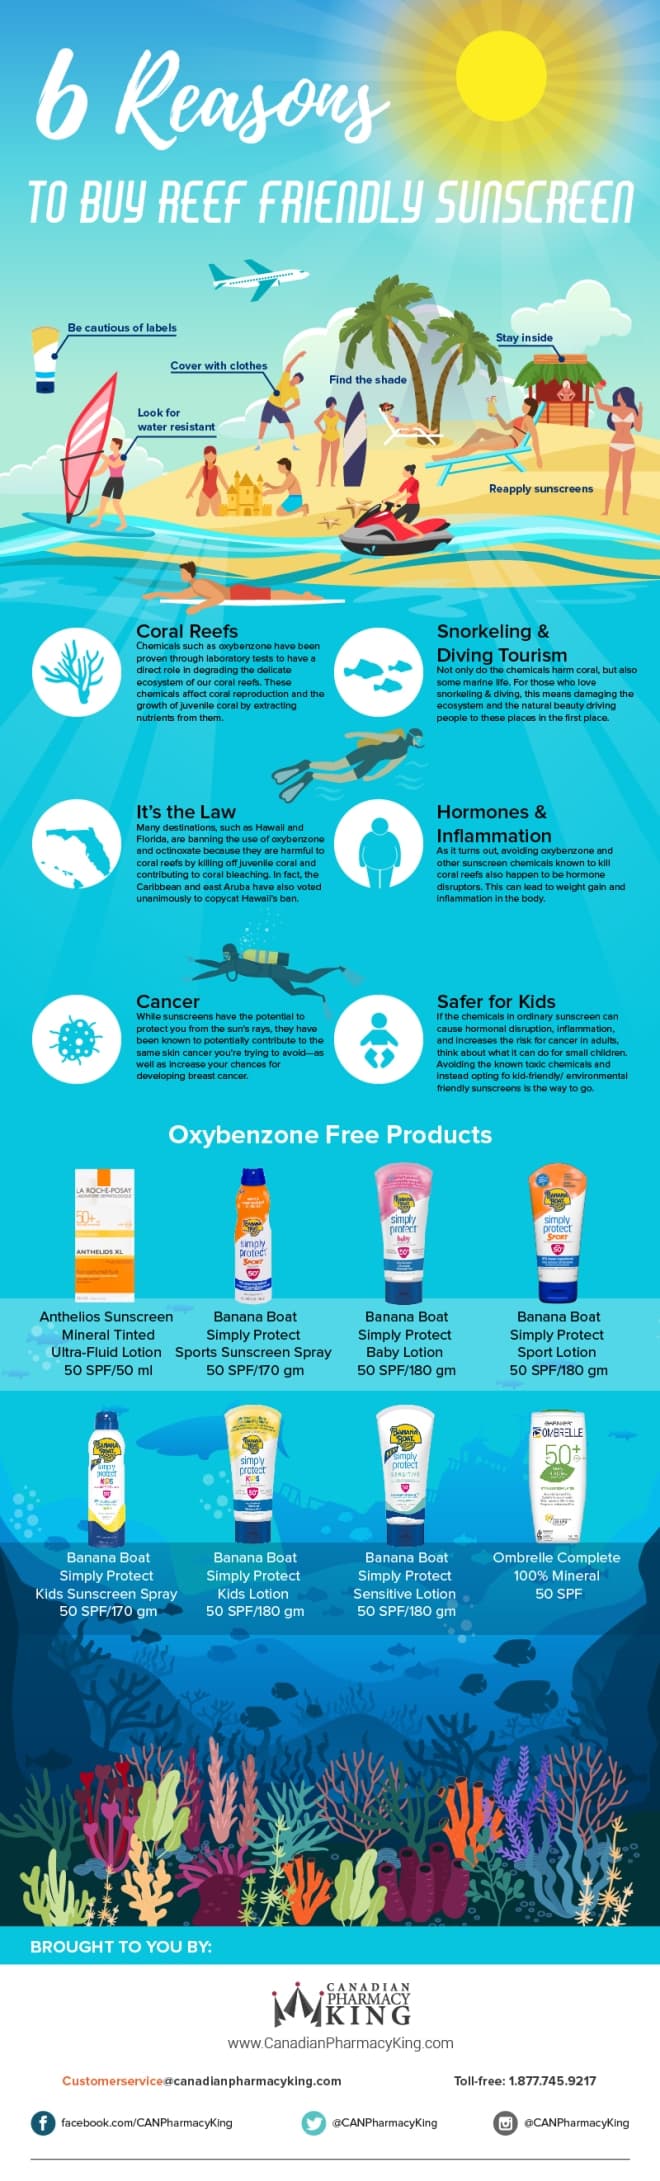 6 Reasons to Buy Reef Friendly Sunscreen infographic